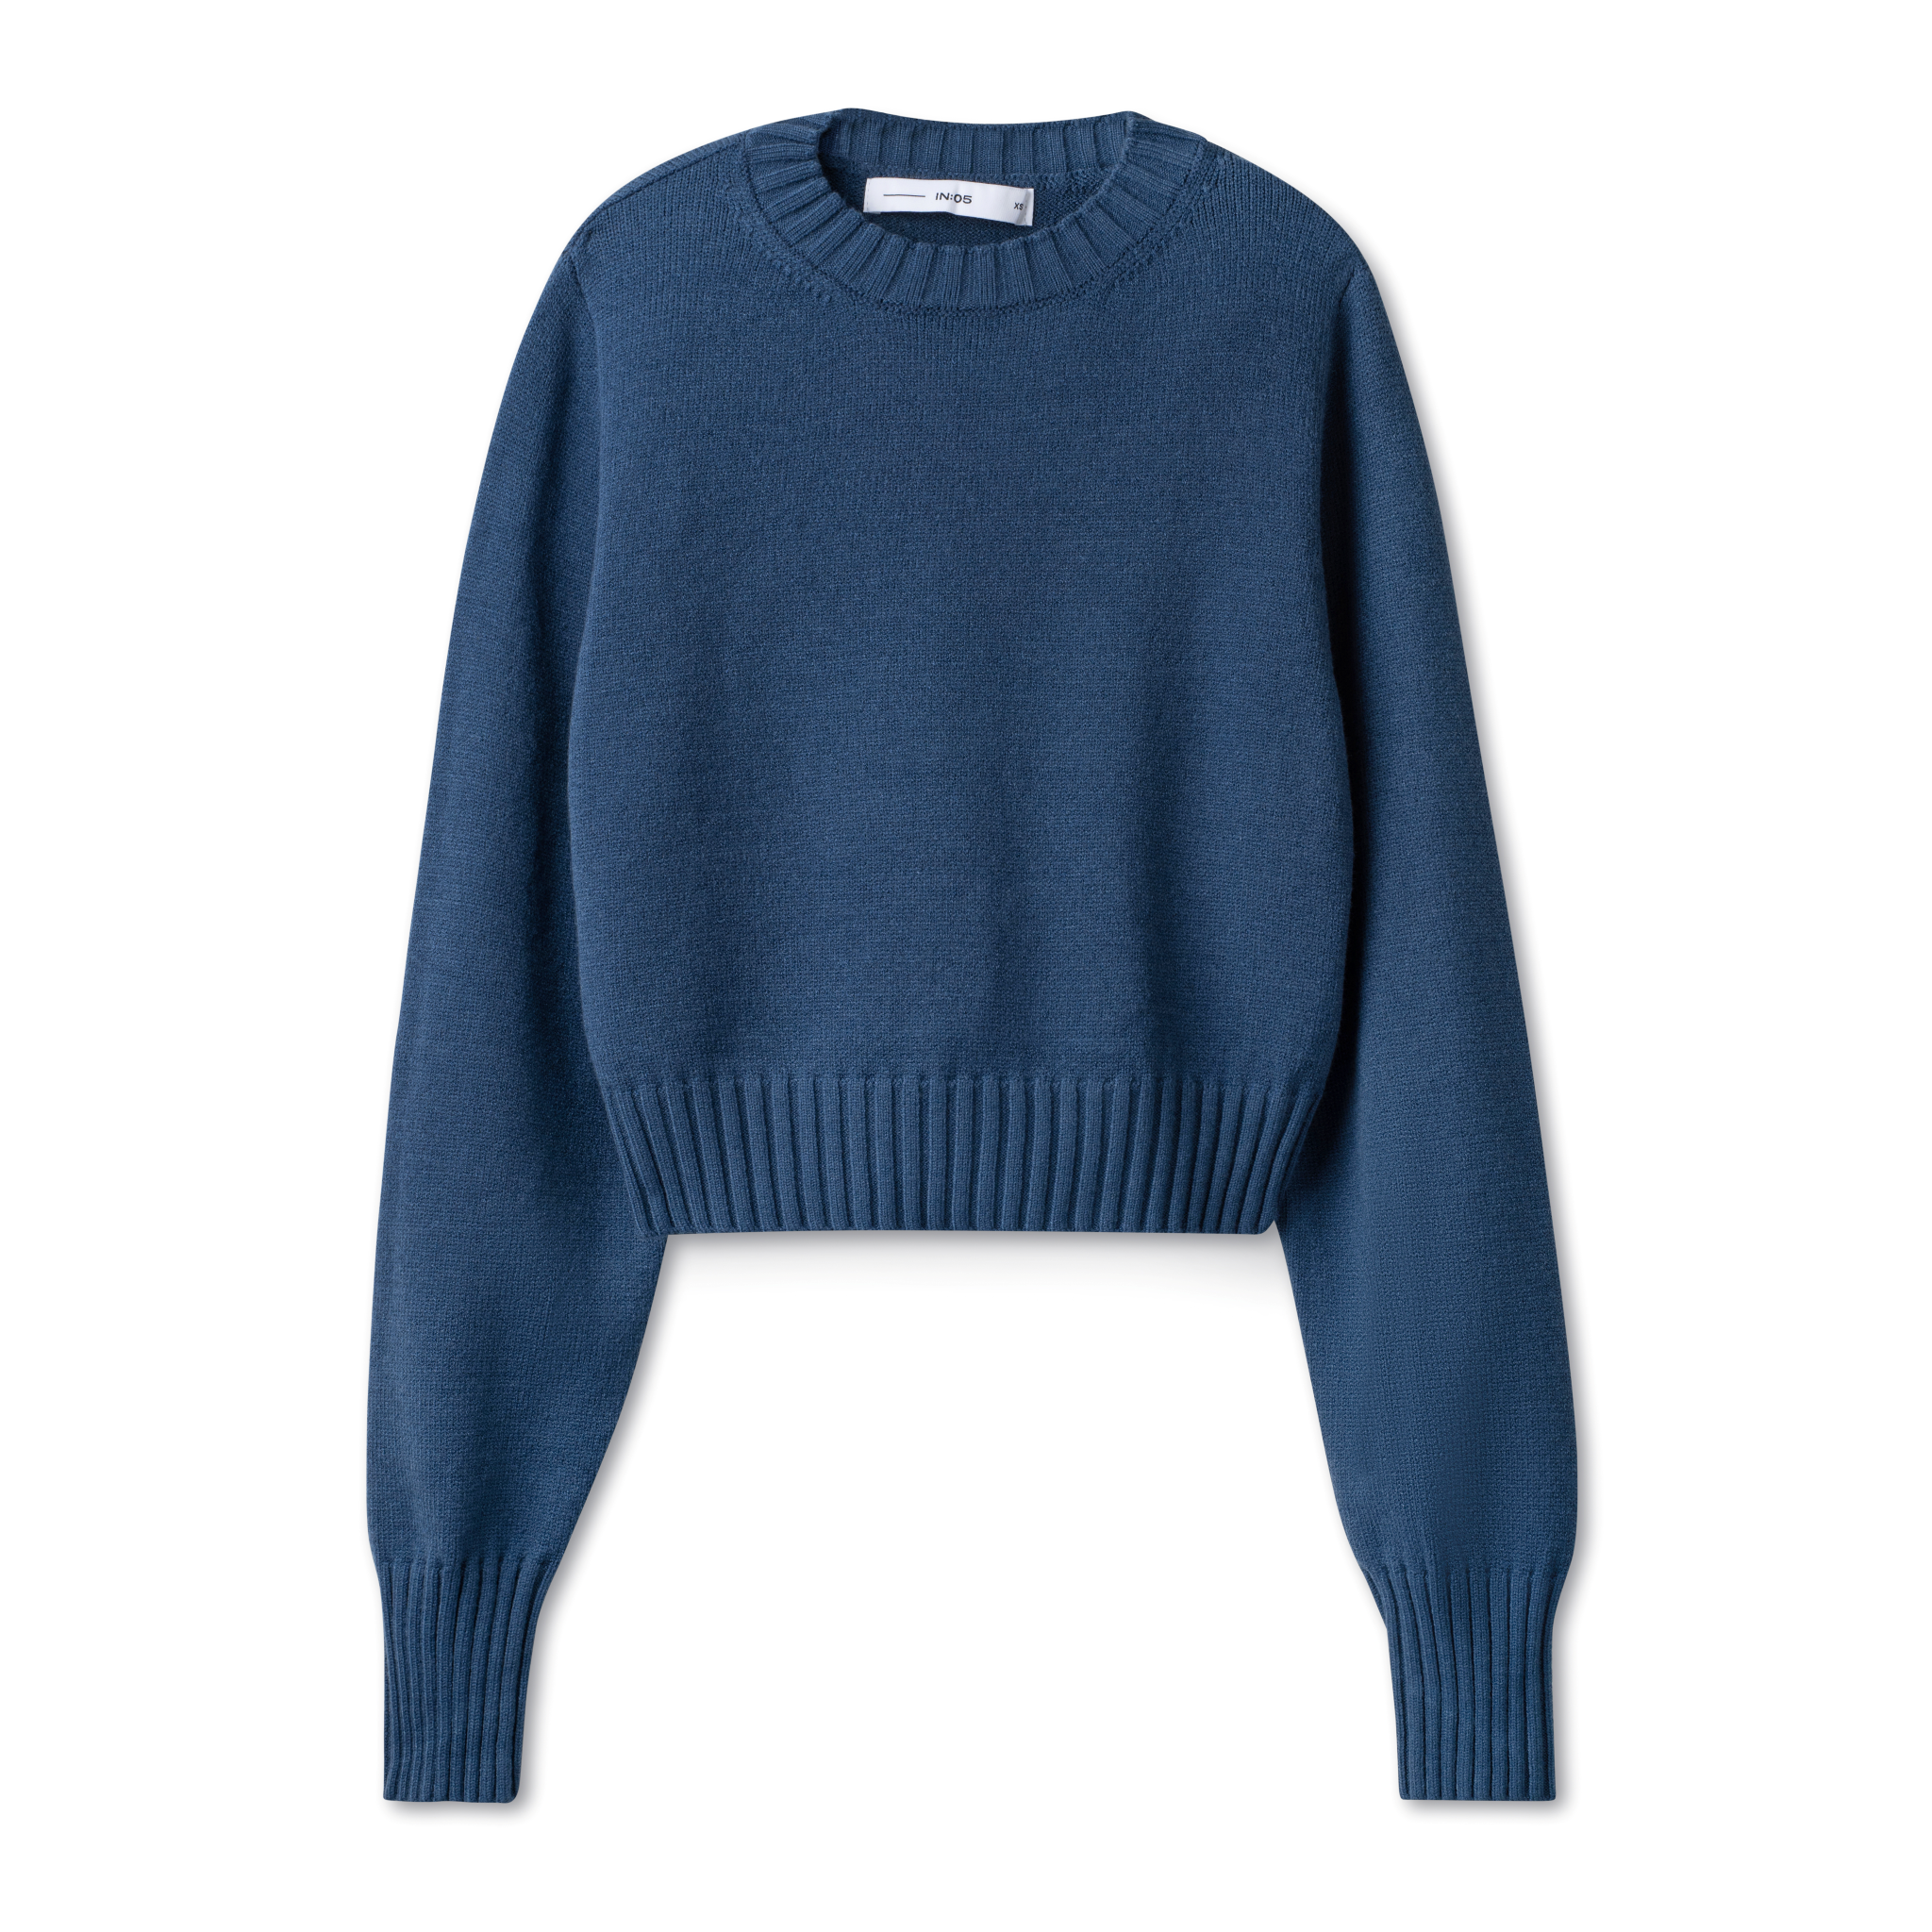 Arm Band Sweater Spice